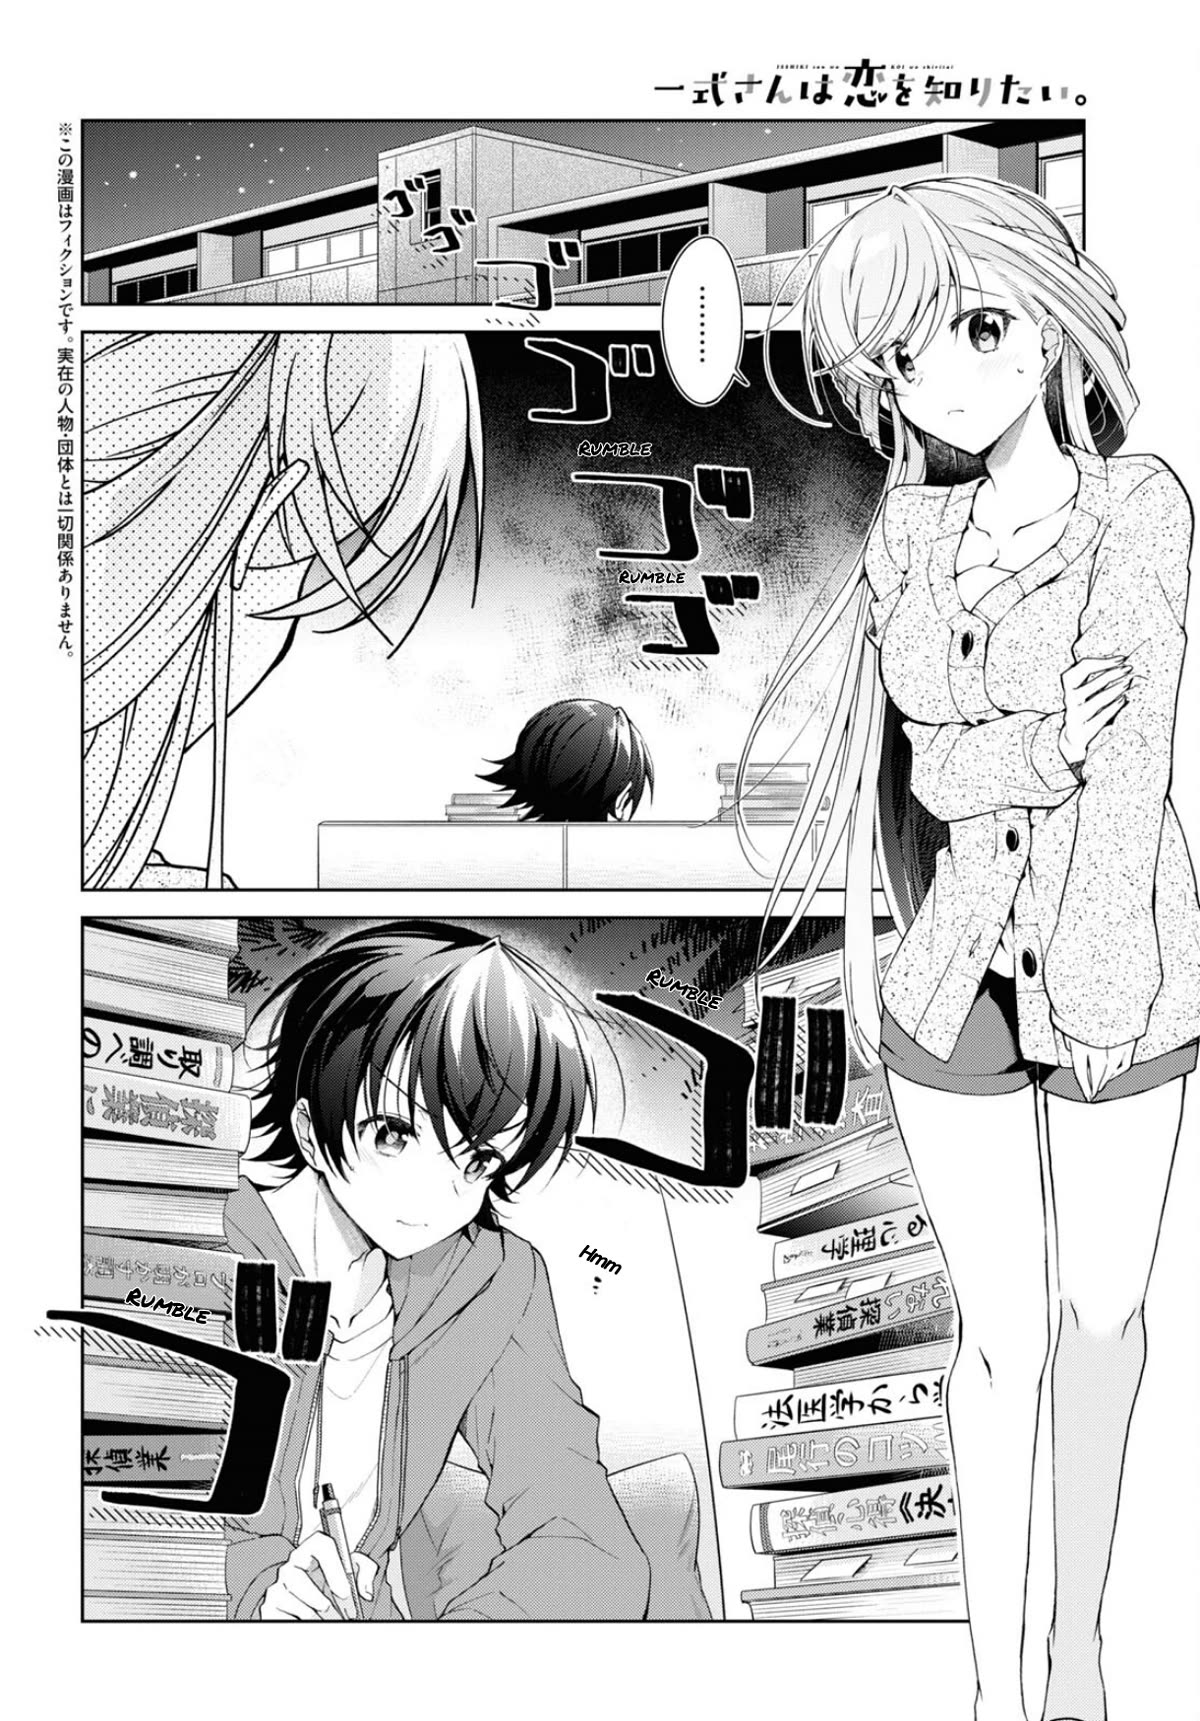 Isshiki-san Wants to Know About Love. - chapter 34 - #3